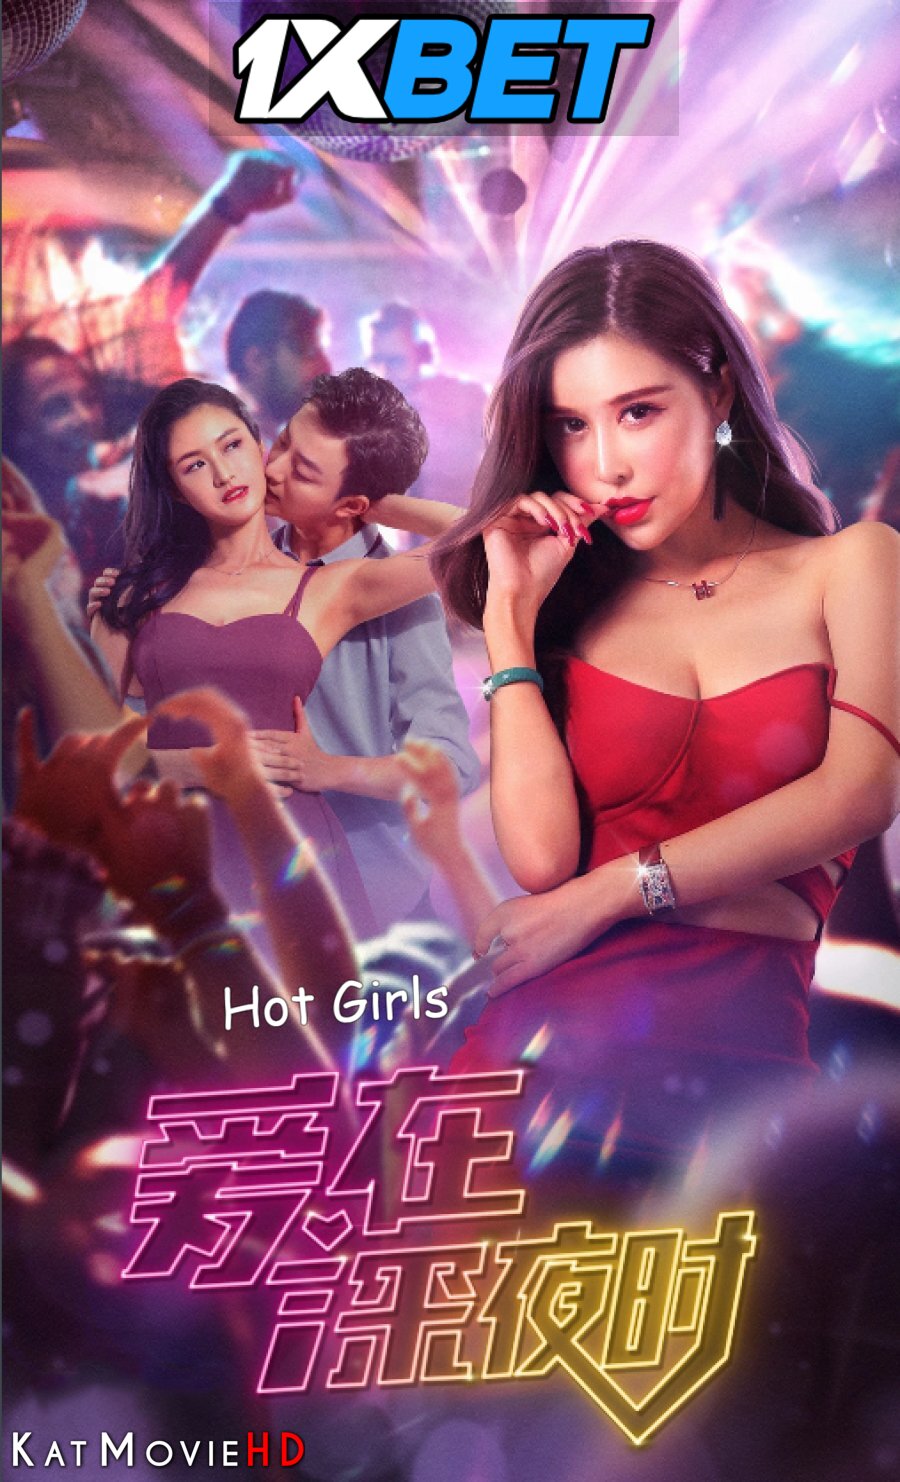 Hot Girls (2020) Full Movie Hindi Dubbed (Unofficial) [WEBRip 720p & 480p] – 1XBET